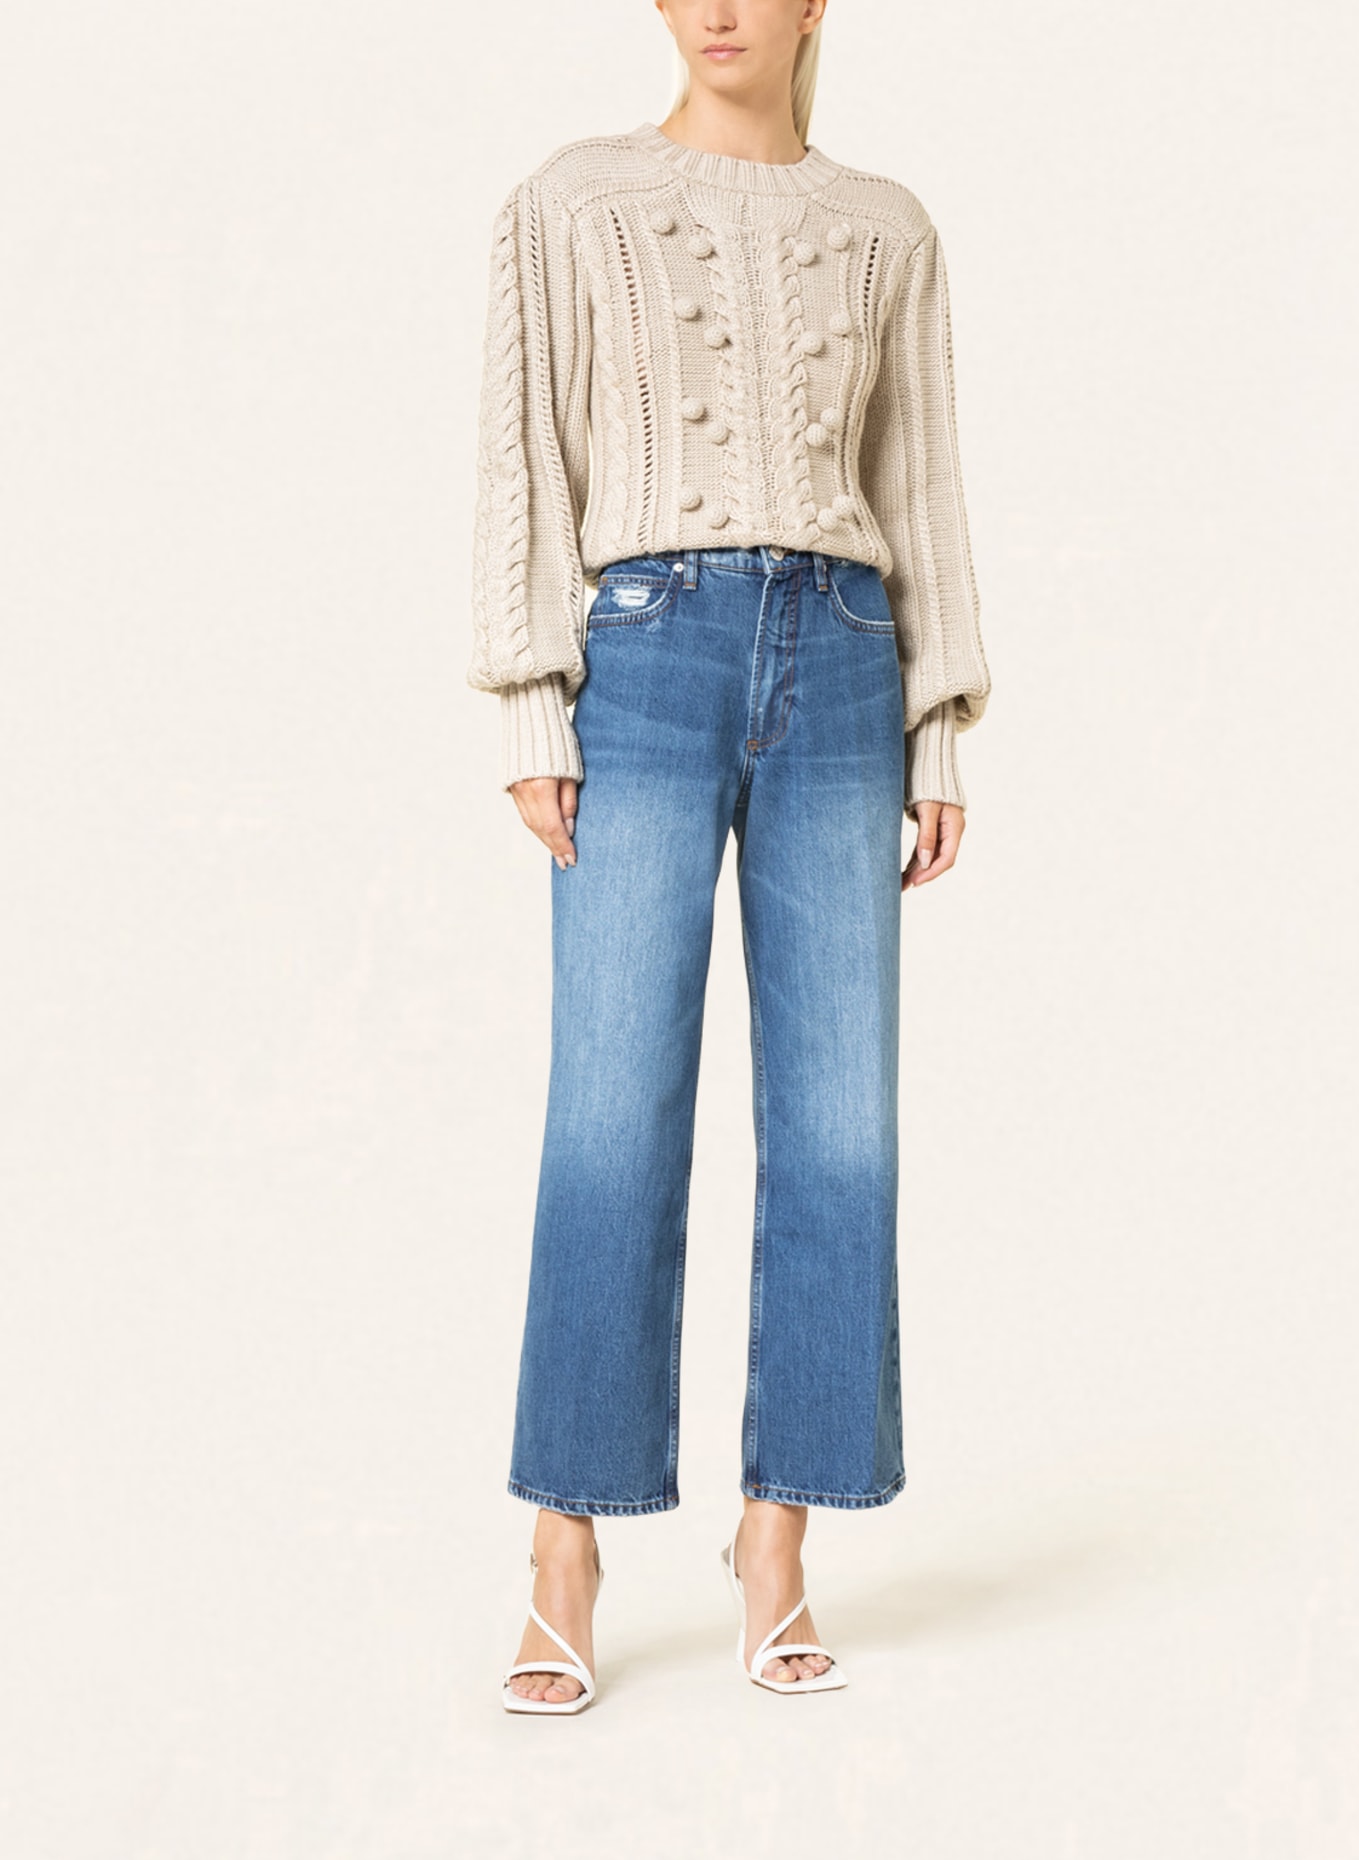 FRAME Jeans-Culotte LE PIXIE HIGH 'N' TIGHT, Farbe: STNL STEARNLEE (Bild 2)